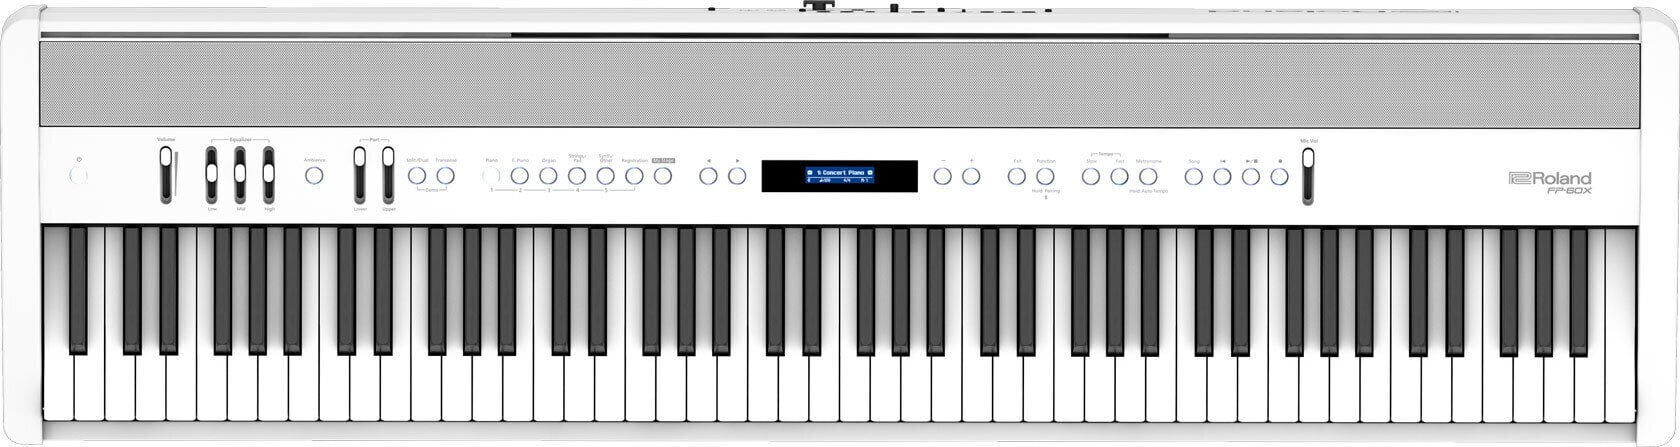 Digital Stage Piano Roland FP 60X WH Digital Stage Piano